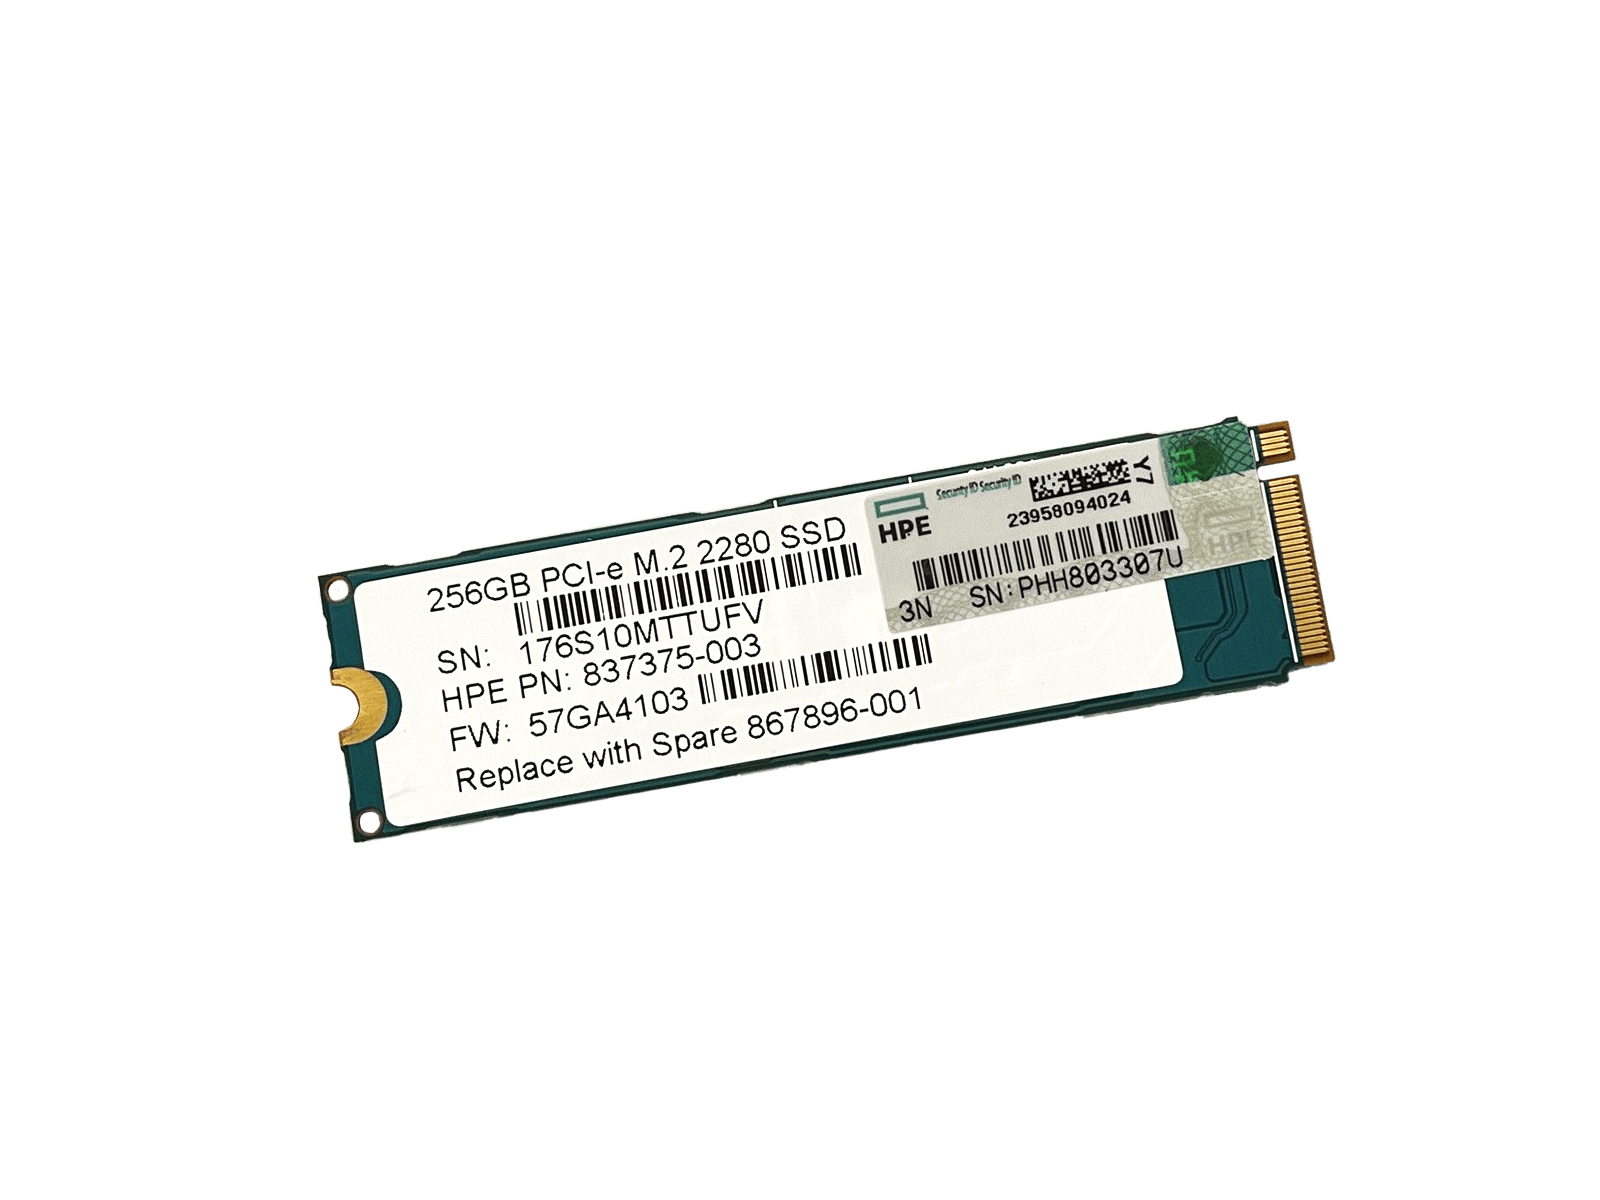 HPE 867896-001 256GB PCIe M.2 2280 MLC SSD Solid State Drive